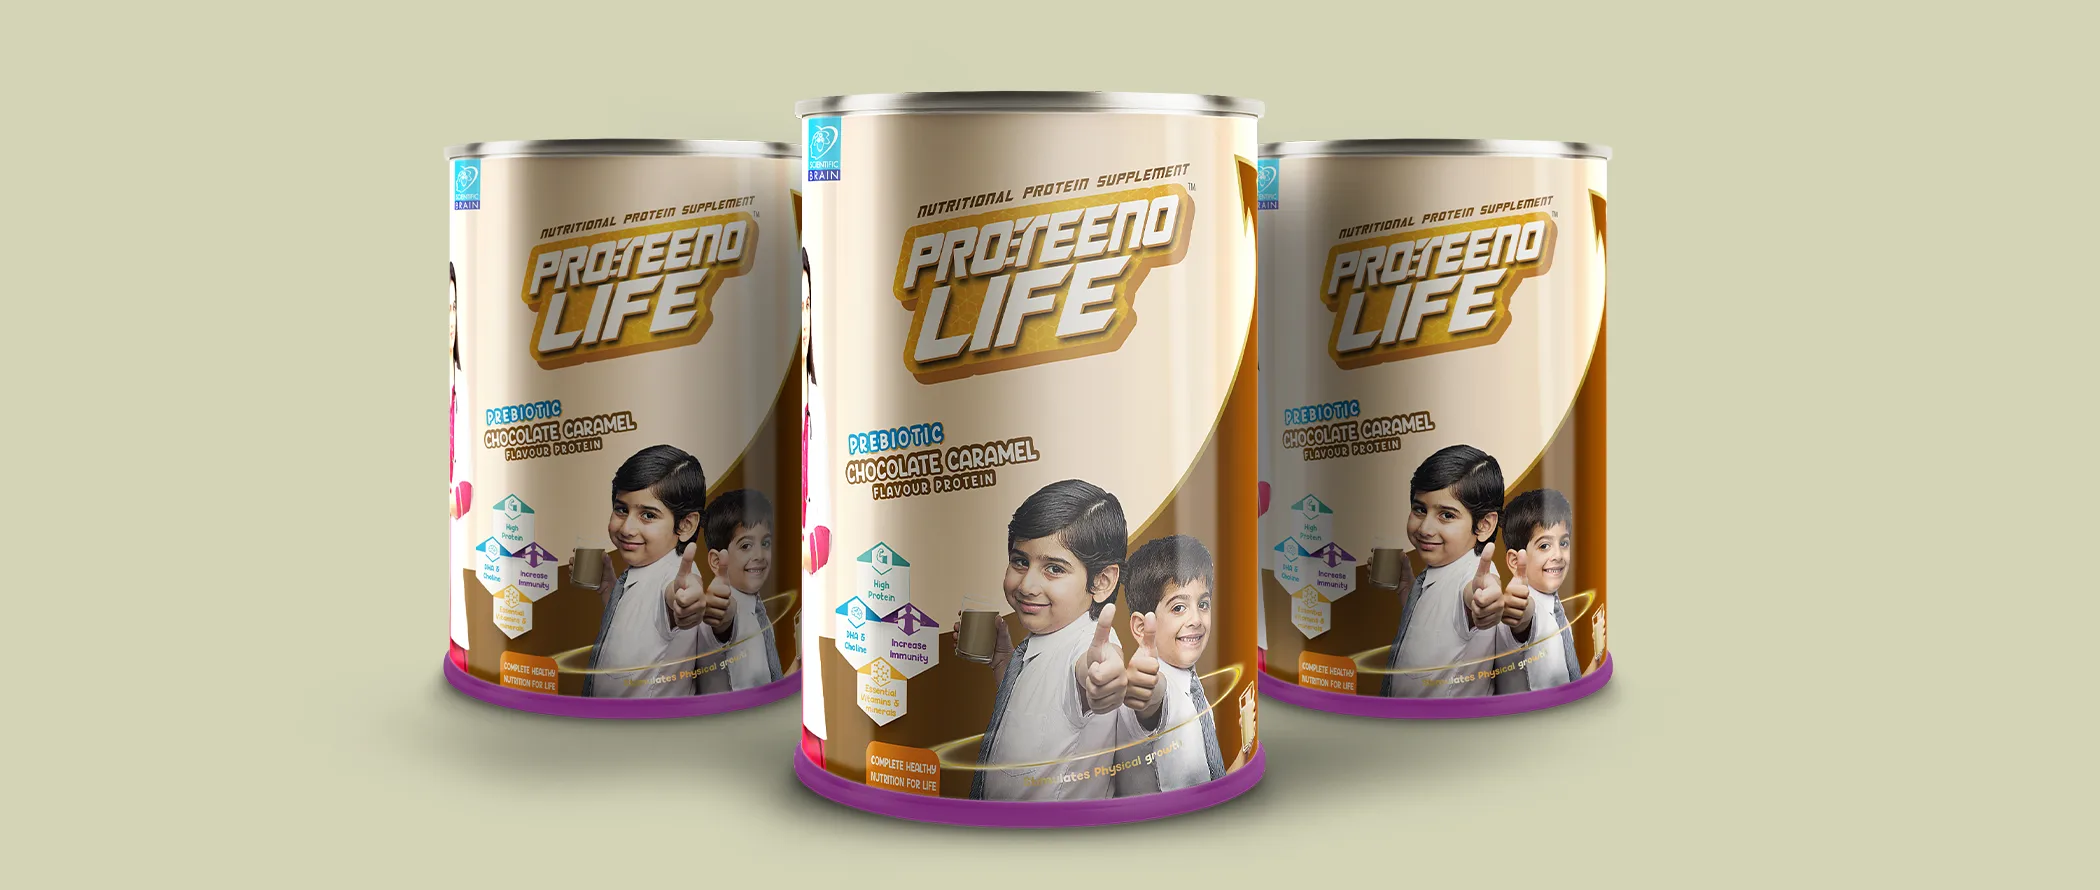 Proteeno Life product packaging design, product packaging design companies, protein powder packaging, protein supplements packaging, Brij Design Studio, product packaging design agency, protein powder packaging design, product packaging, healthy food packaging, tin container packaging, infant formula packaging, product packaging design company, probiotic nutrition packaging design, product packaging design, protein powder for children, creative packaging design